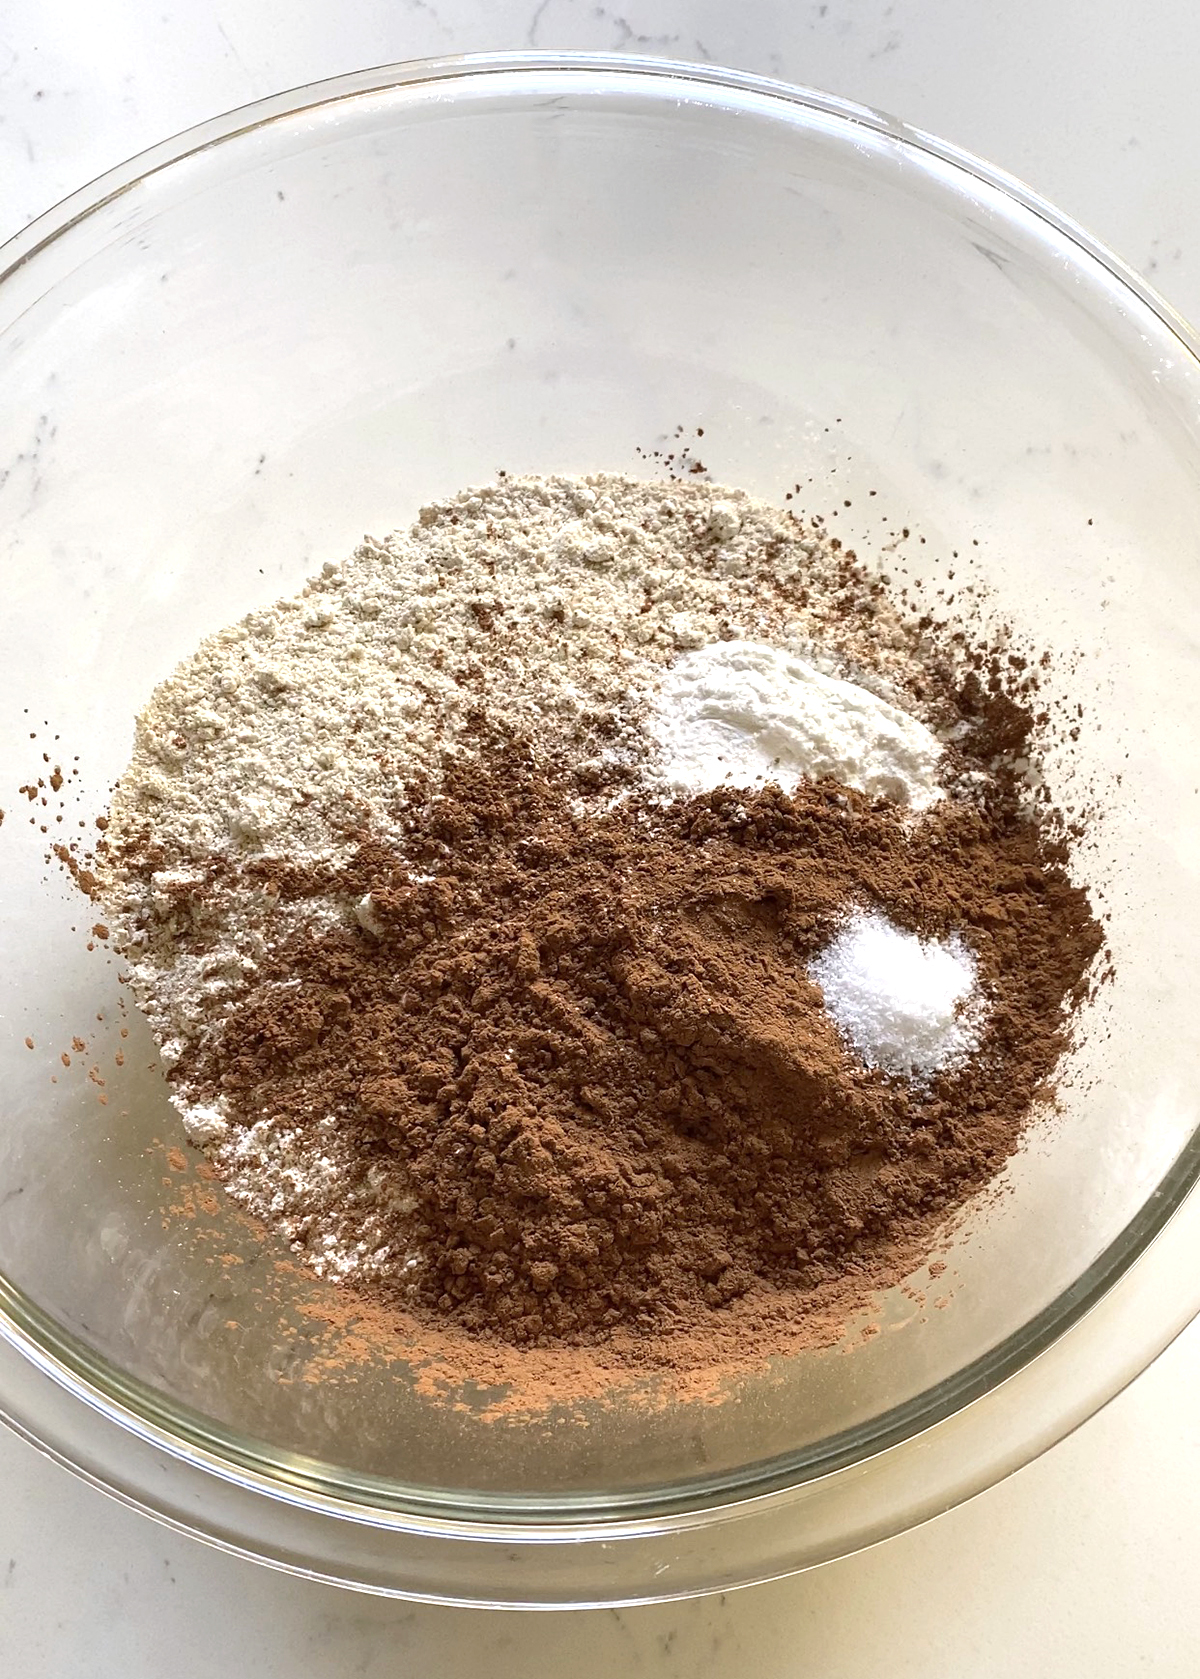 oat flour, cocoa, baking powder, and salt dry ingredients in mixing bowl